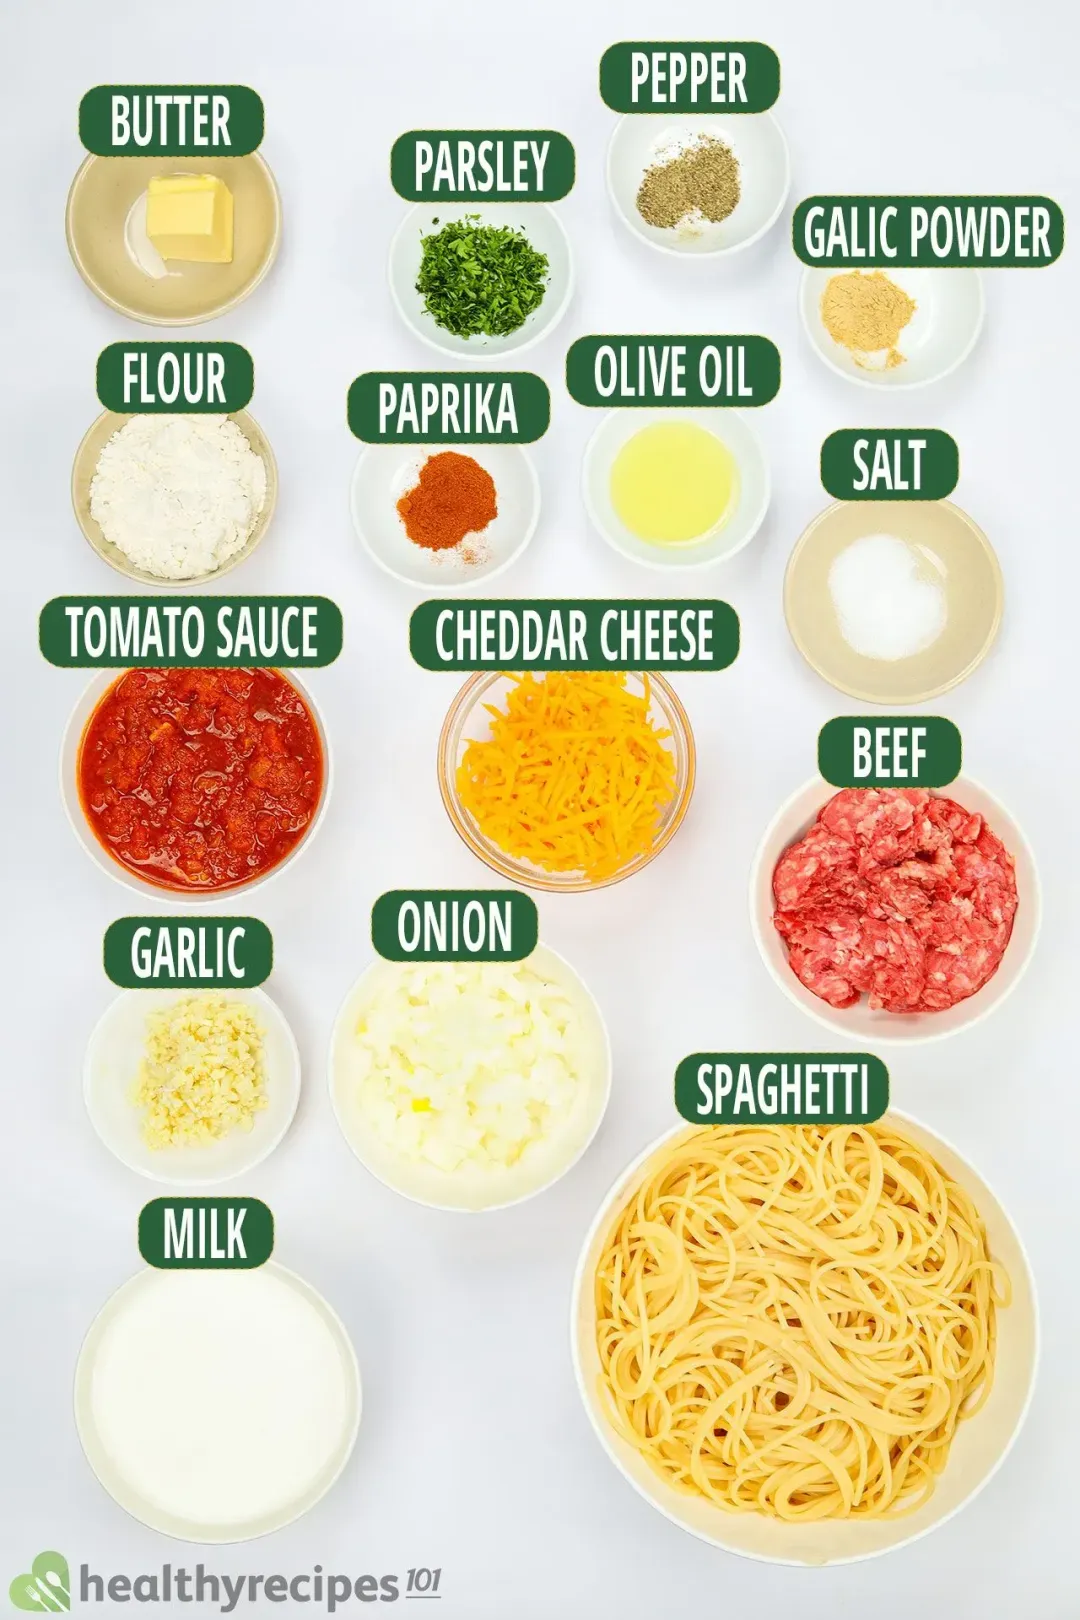 Ingredients for Spaghetti Casserole